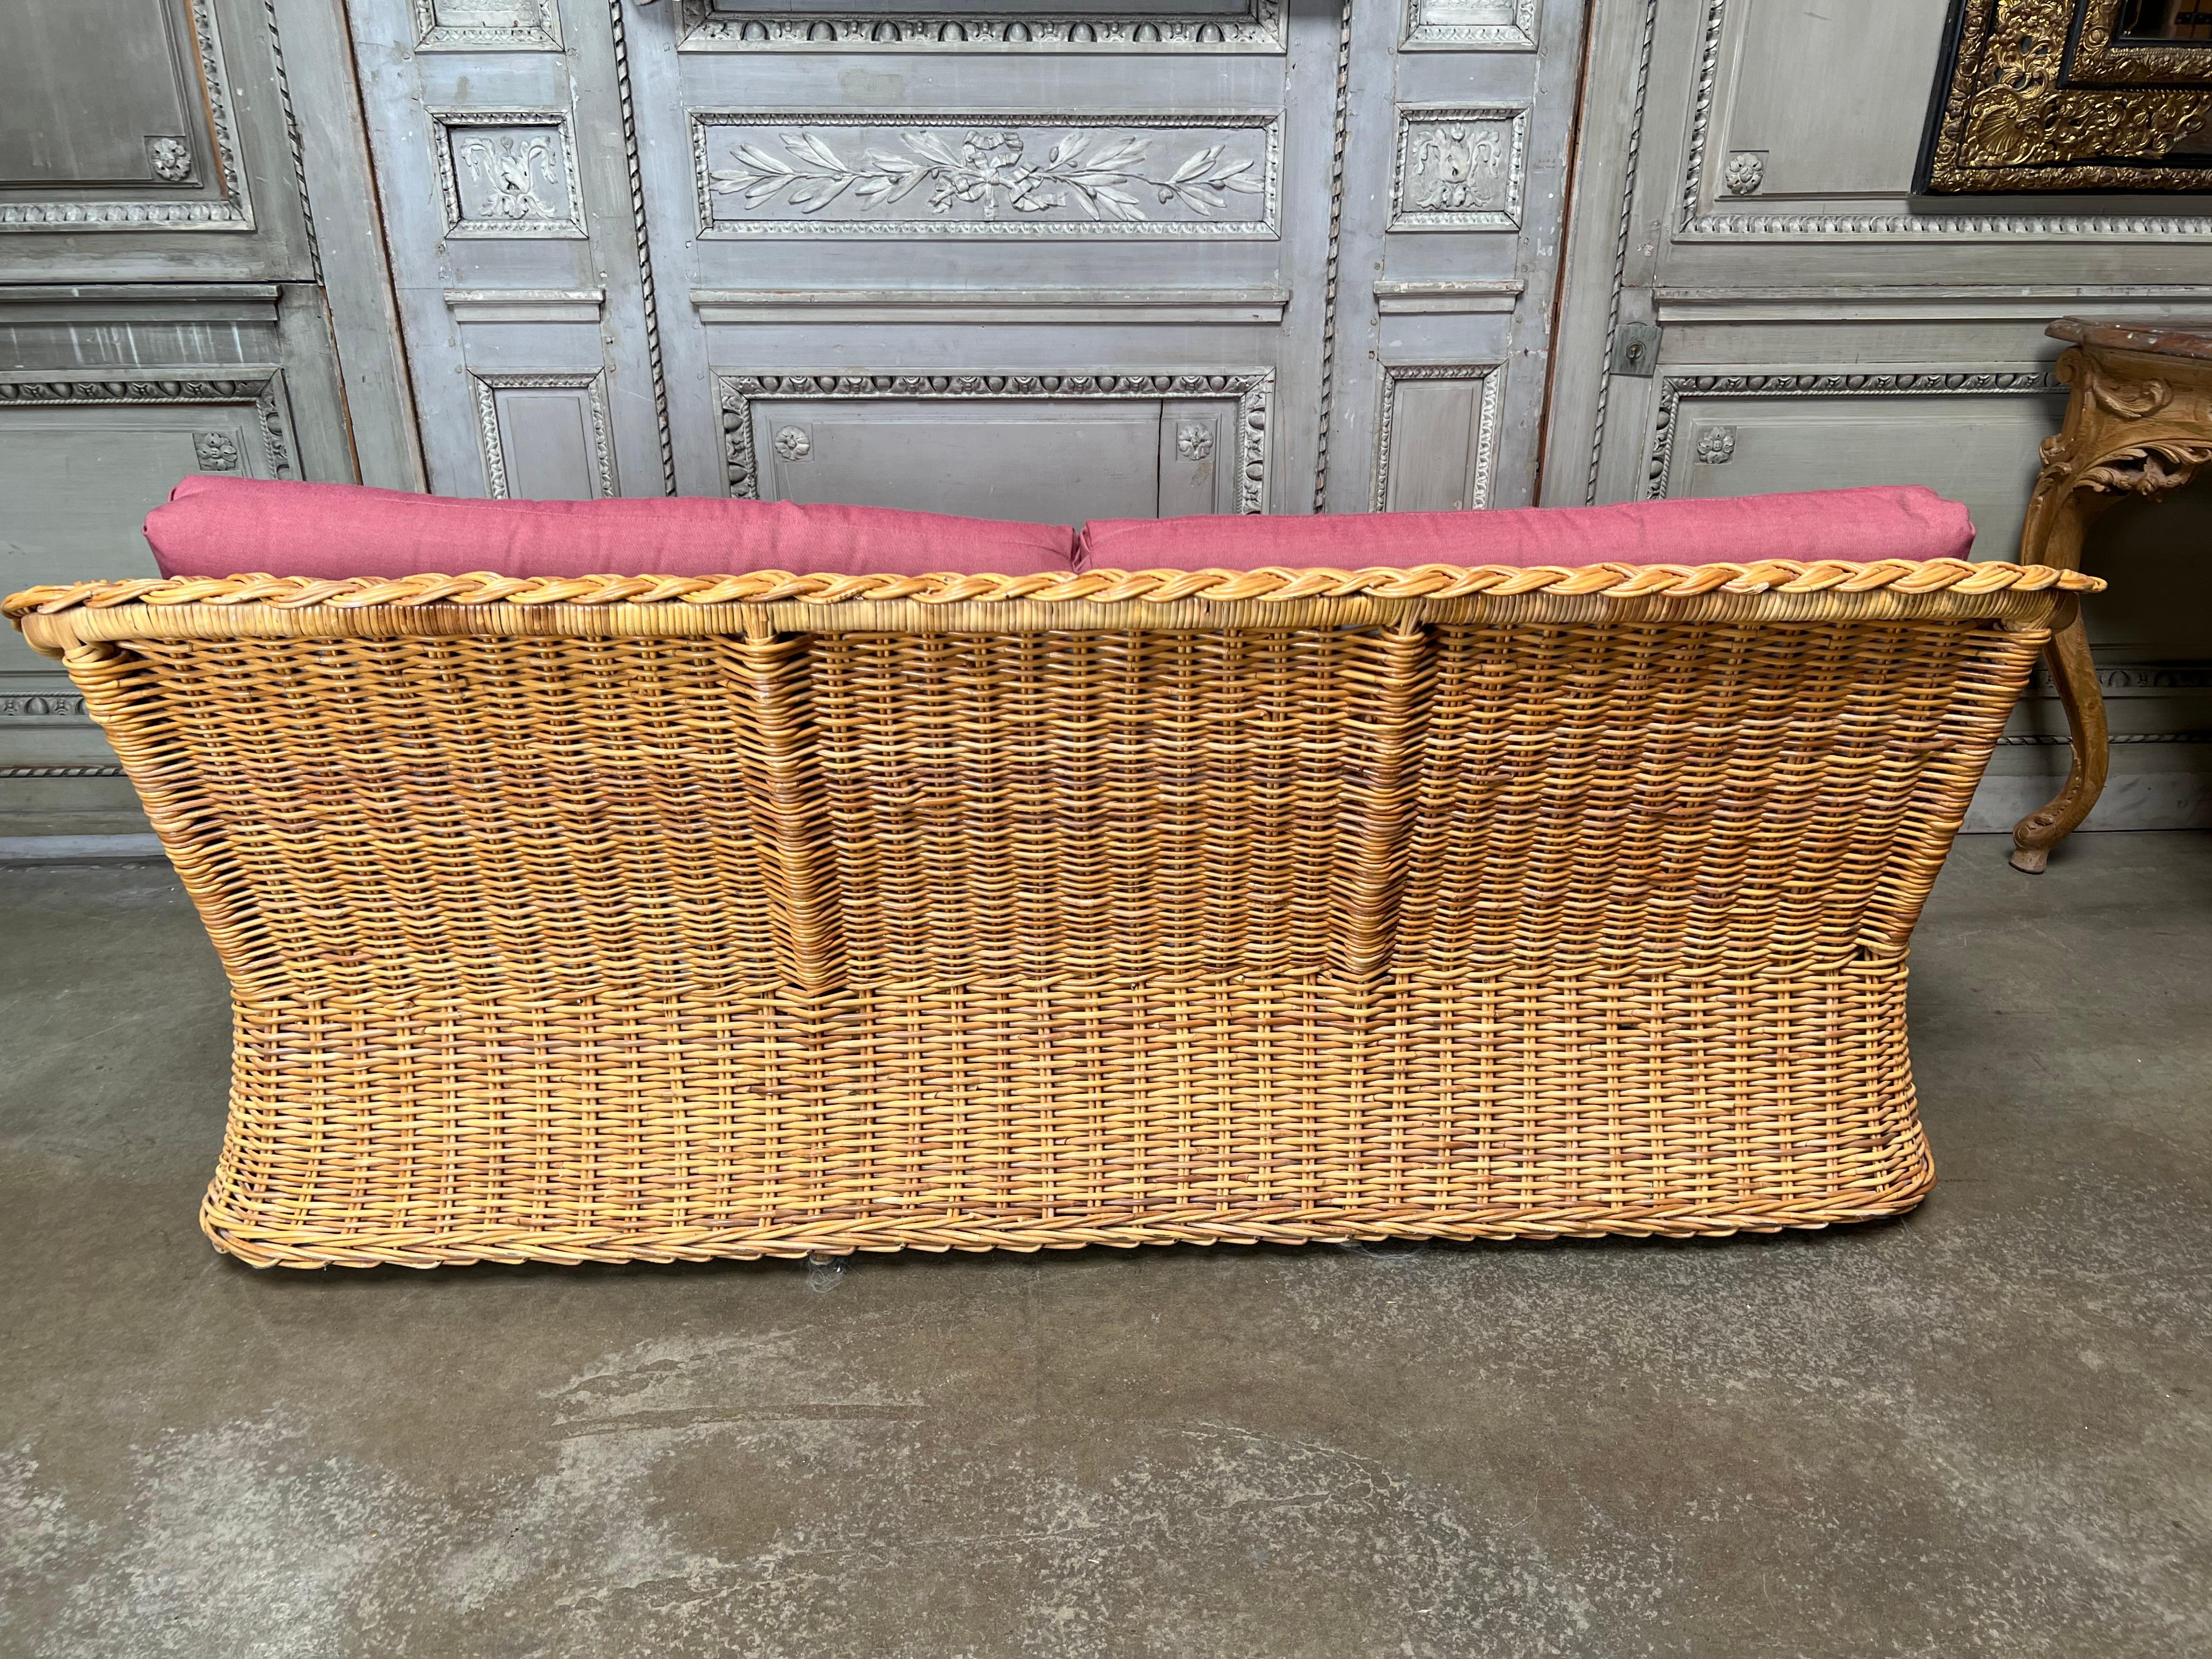 A vintage Wicker Works Sofa from the 1980's. It is a comfortable easy to use sofa that will mix well with almost anything. This sofa does have a few flaws on the wicker and the fabric is fresh and usable but is used. 
This sofa has a pair of